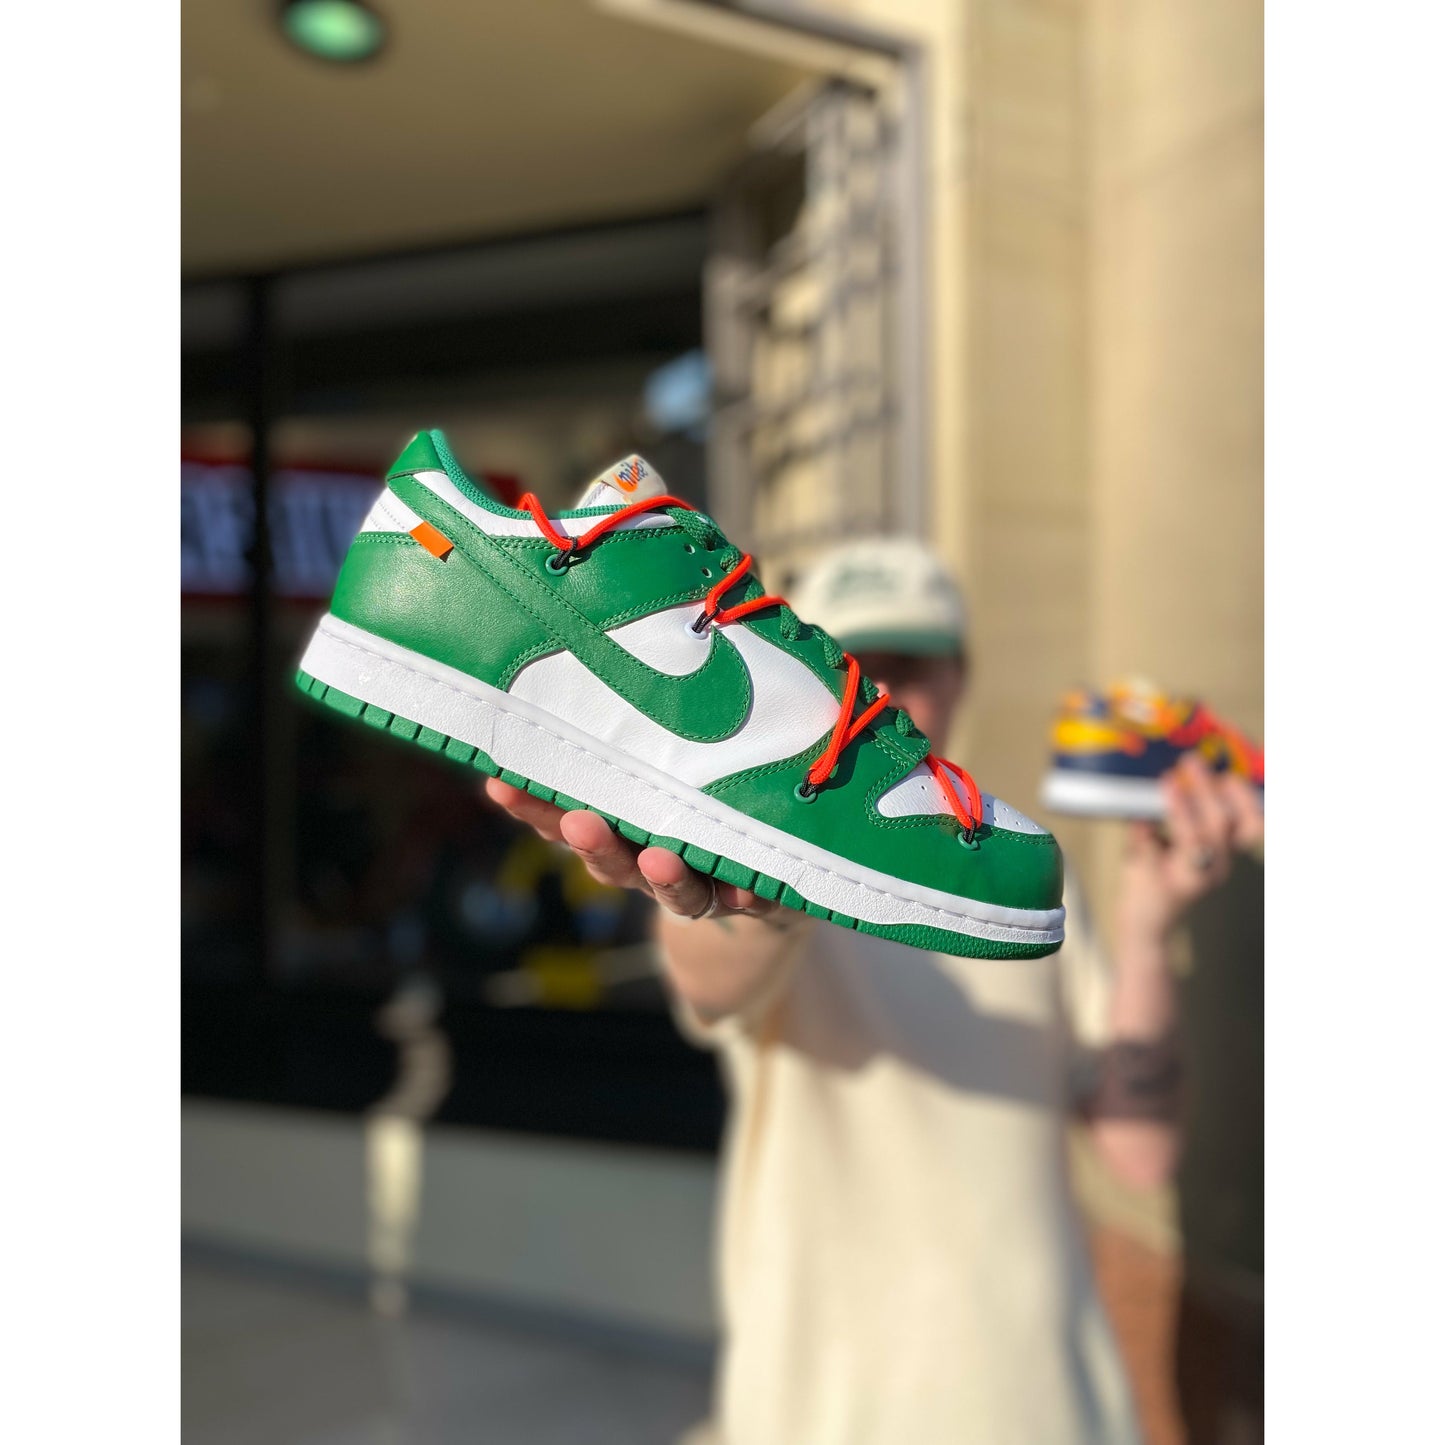 Nike Dunk Low Off-White Pine Green by Nike from £1020.00